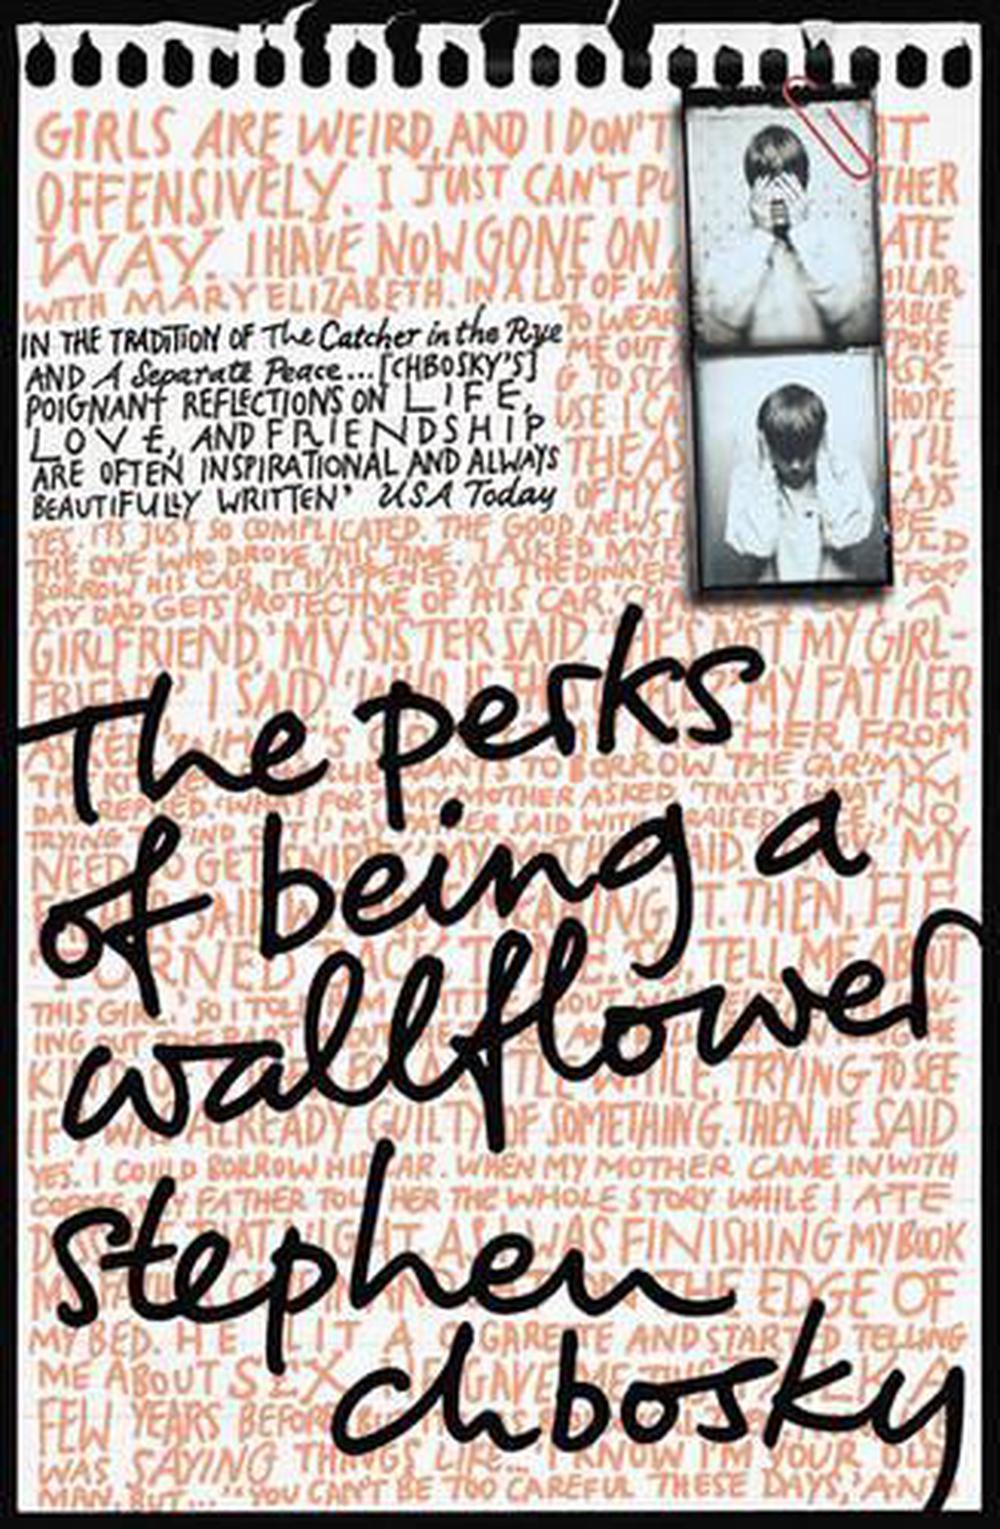 book review on perks of being a wallflower